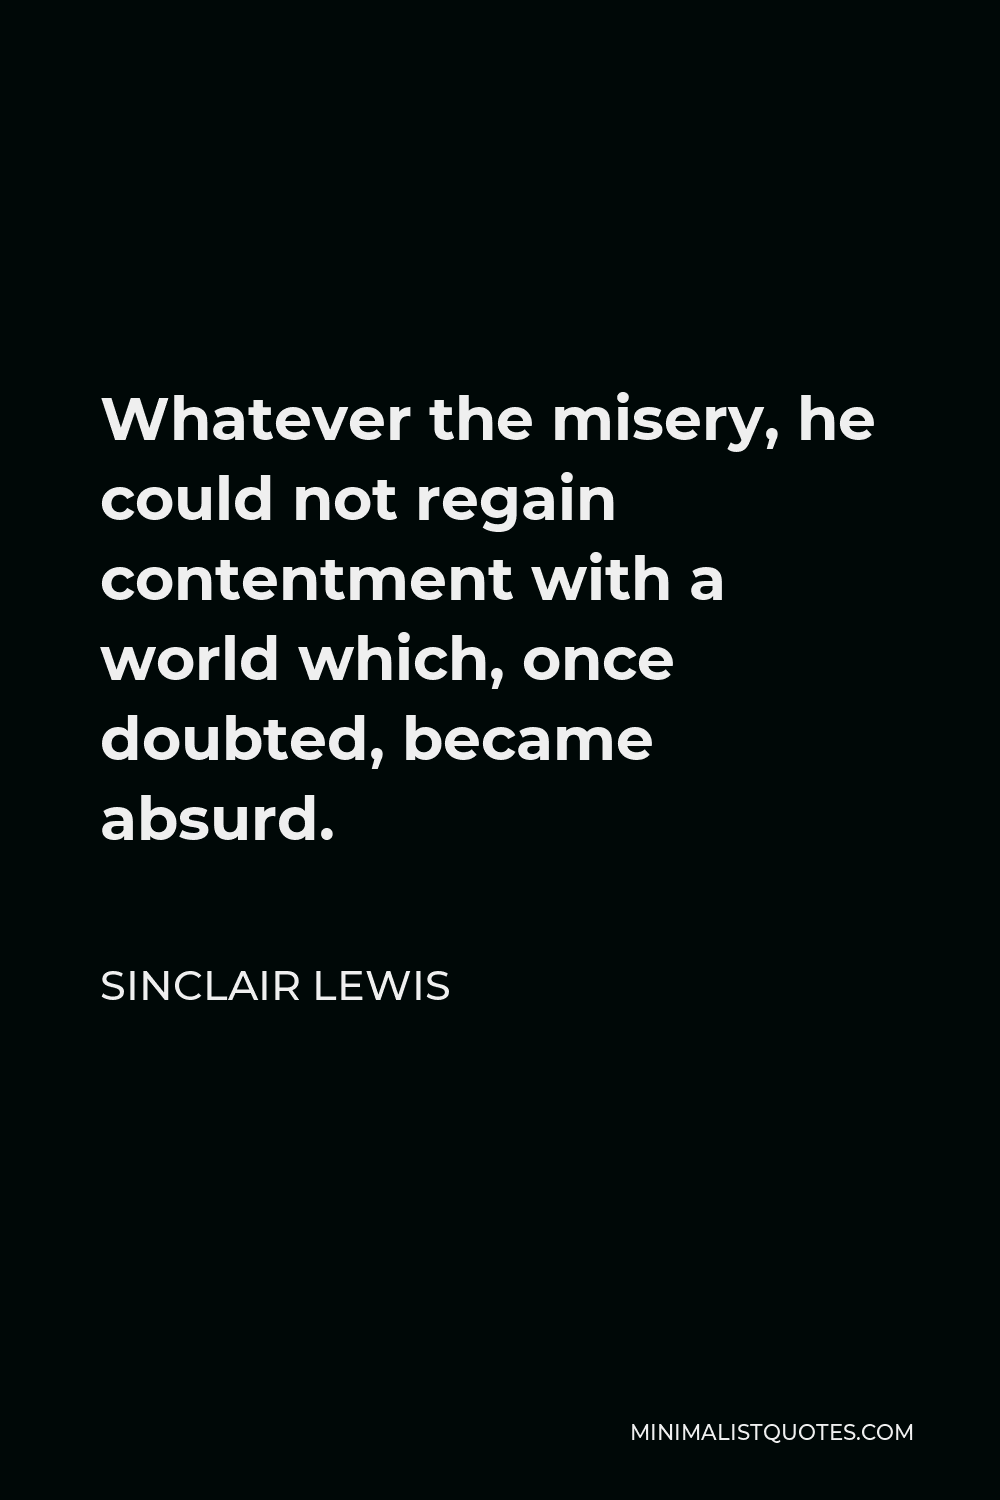 Sinclair Lewis Quote - Whatever the misery, he could not regain contentment with a world which, once doubted, became absurd.